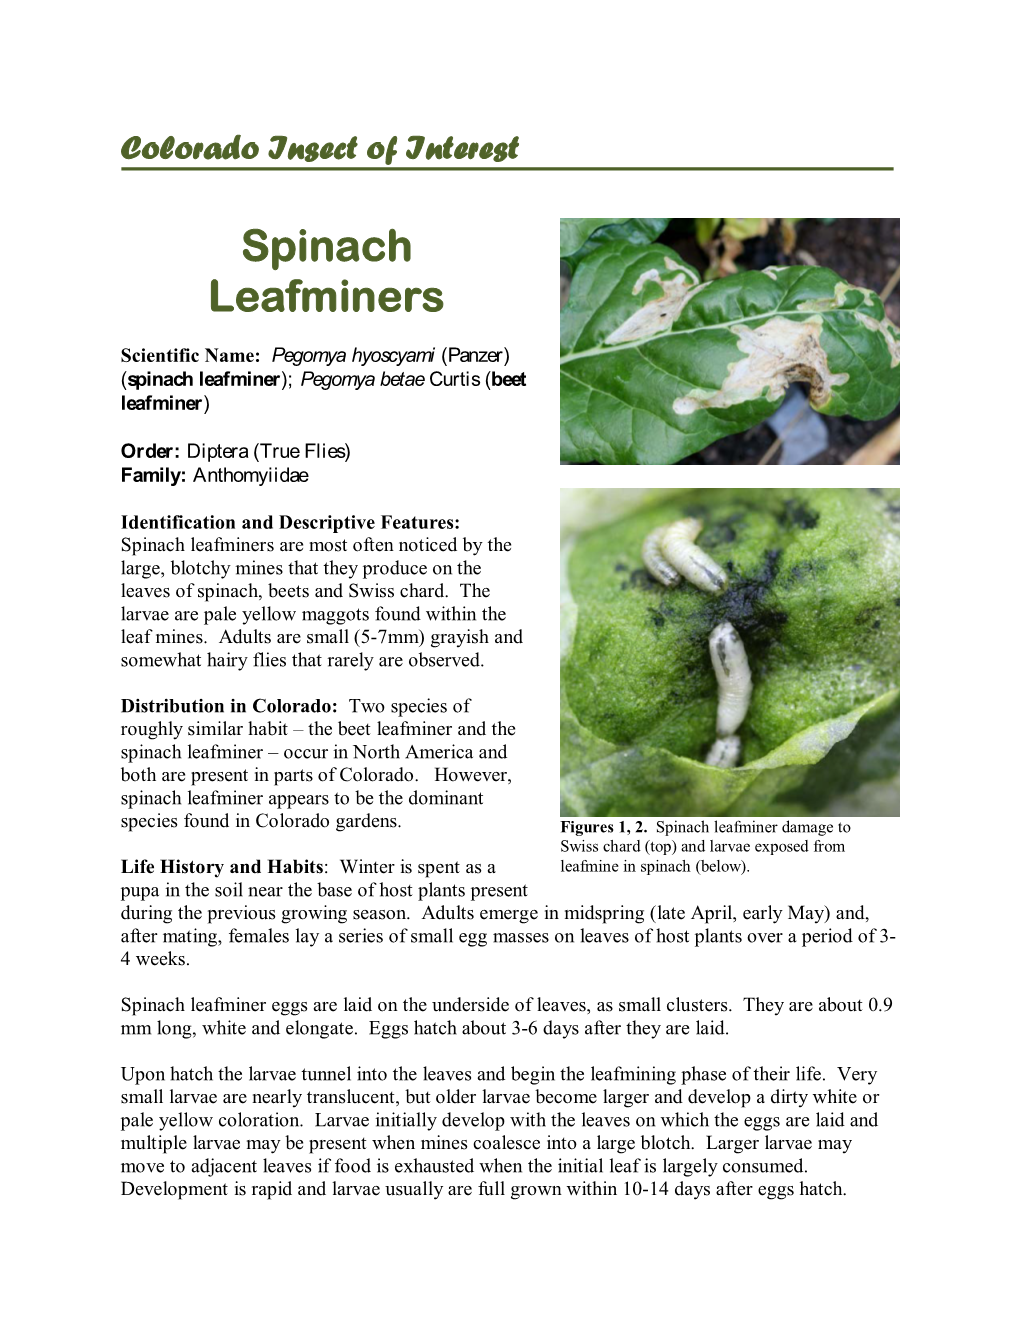 Spinach Leafminers